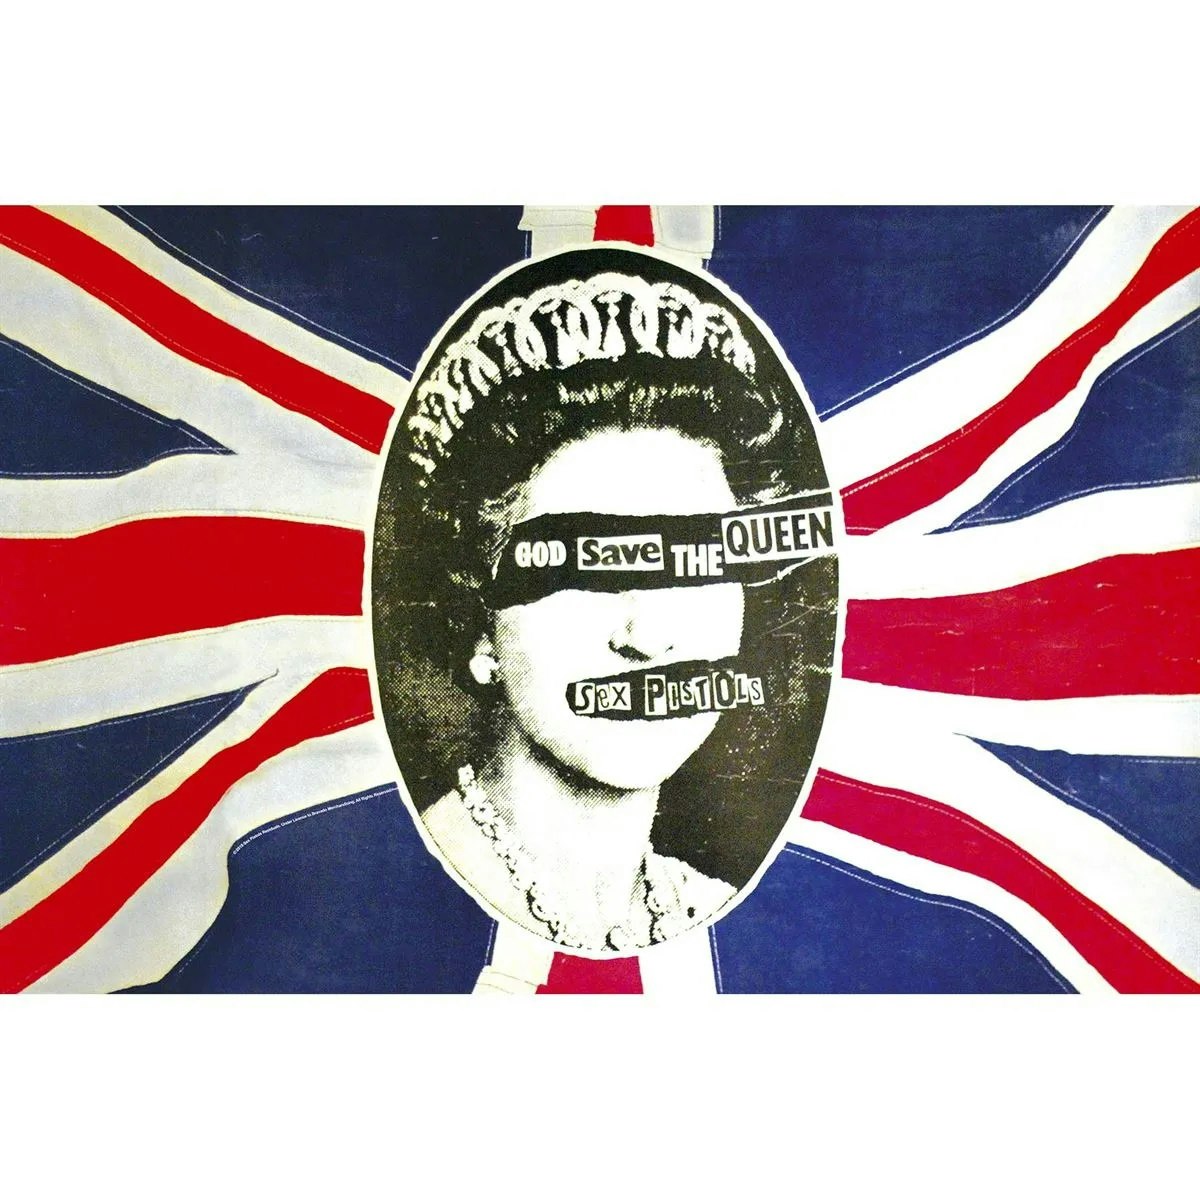 SIX PISTOLS - GOD SAVE THE QUEEN poster flag